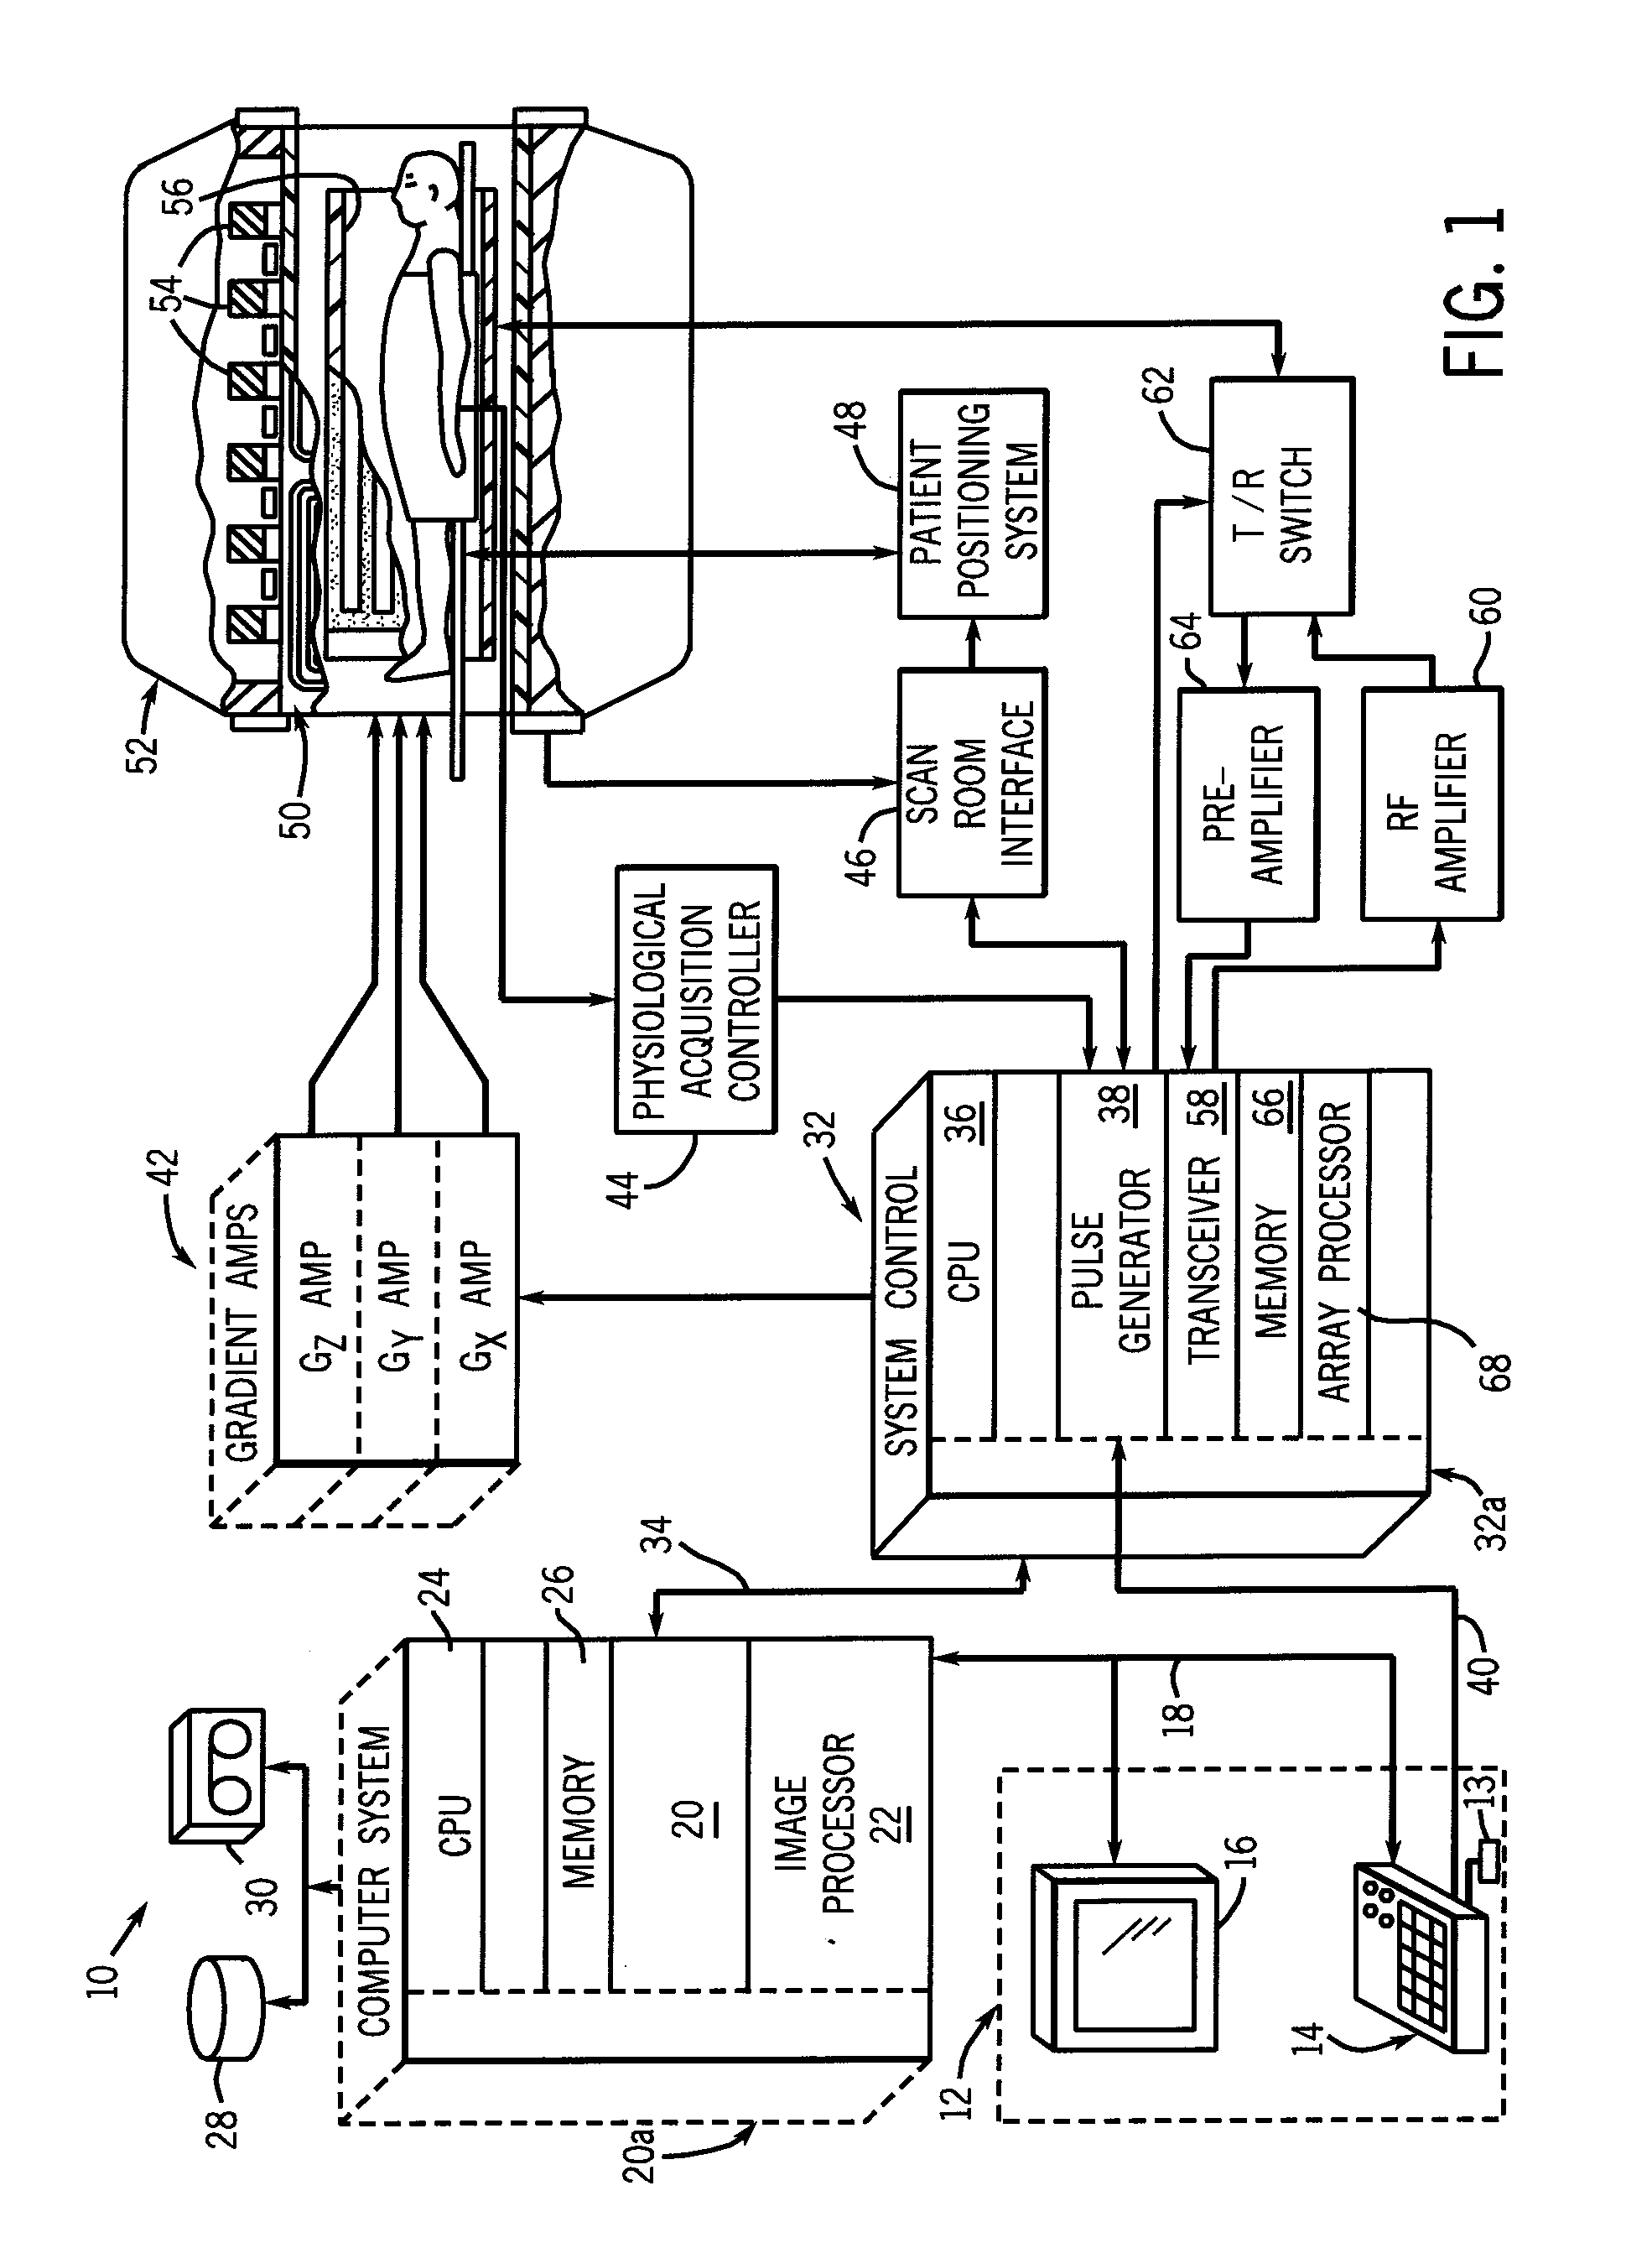 Integrated capacitor shield for balun in MRI receivers